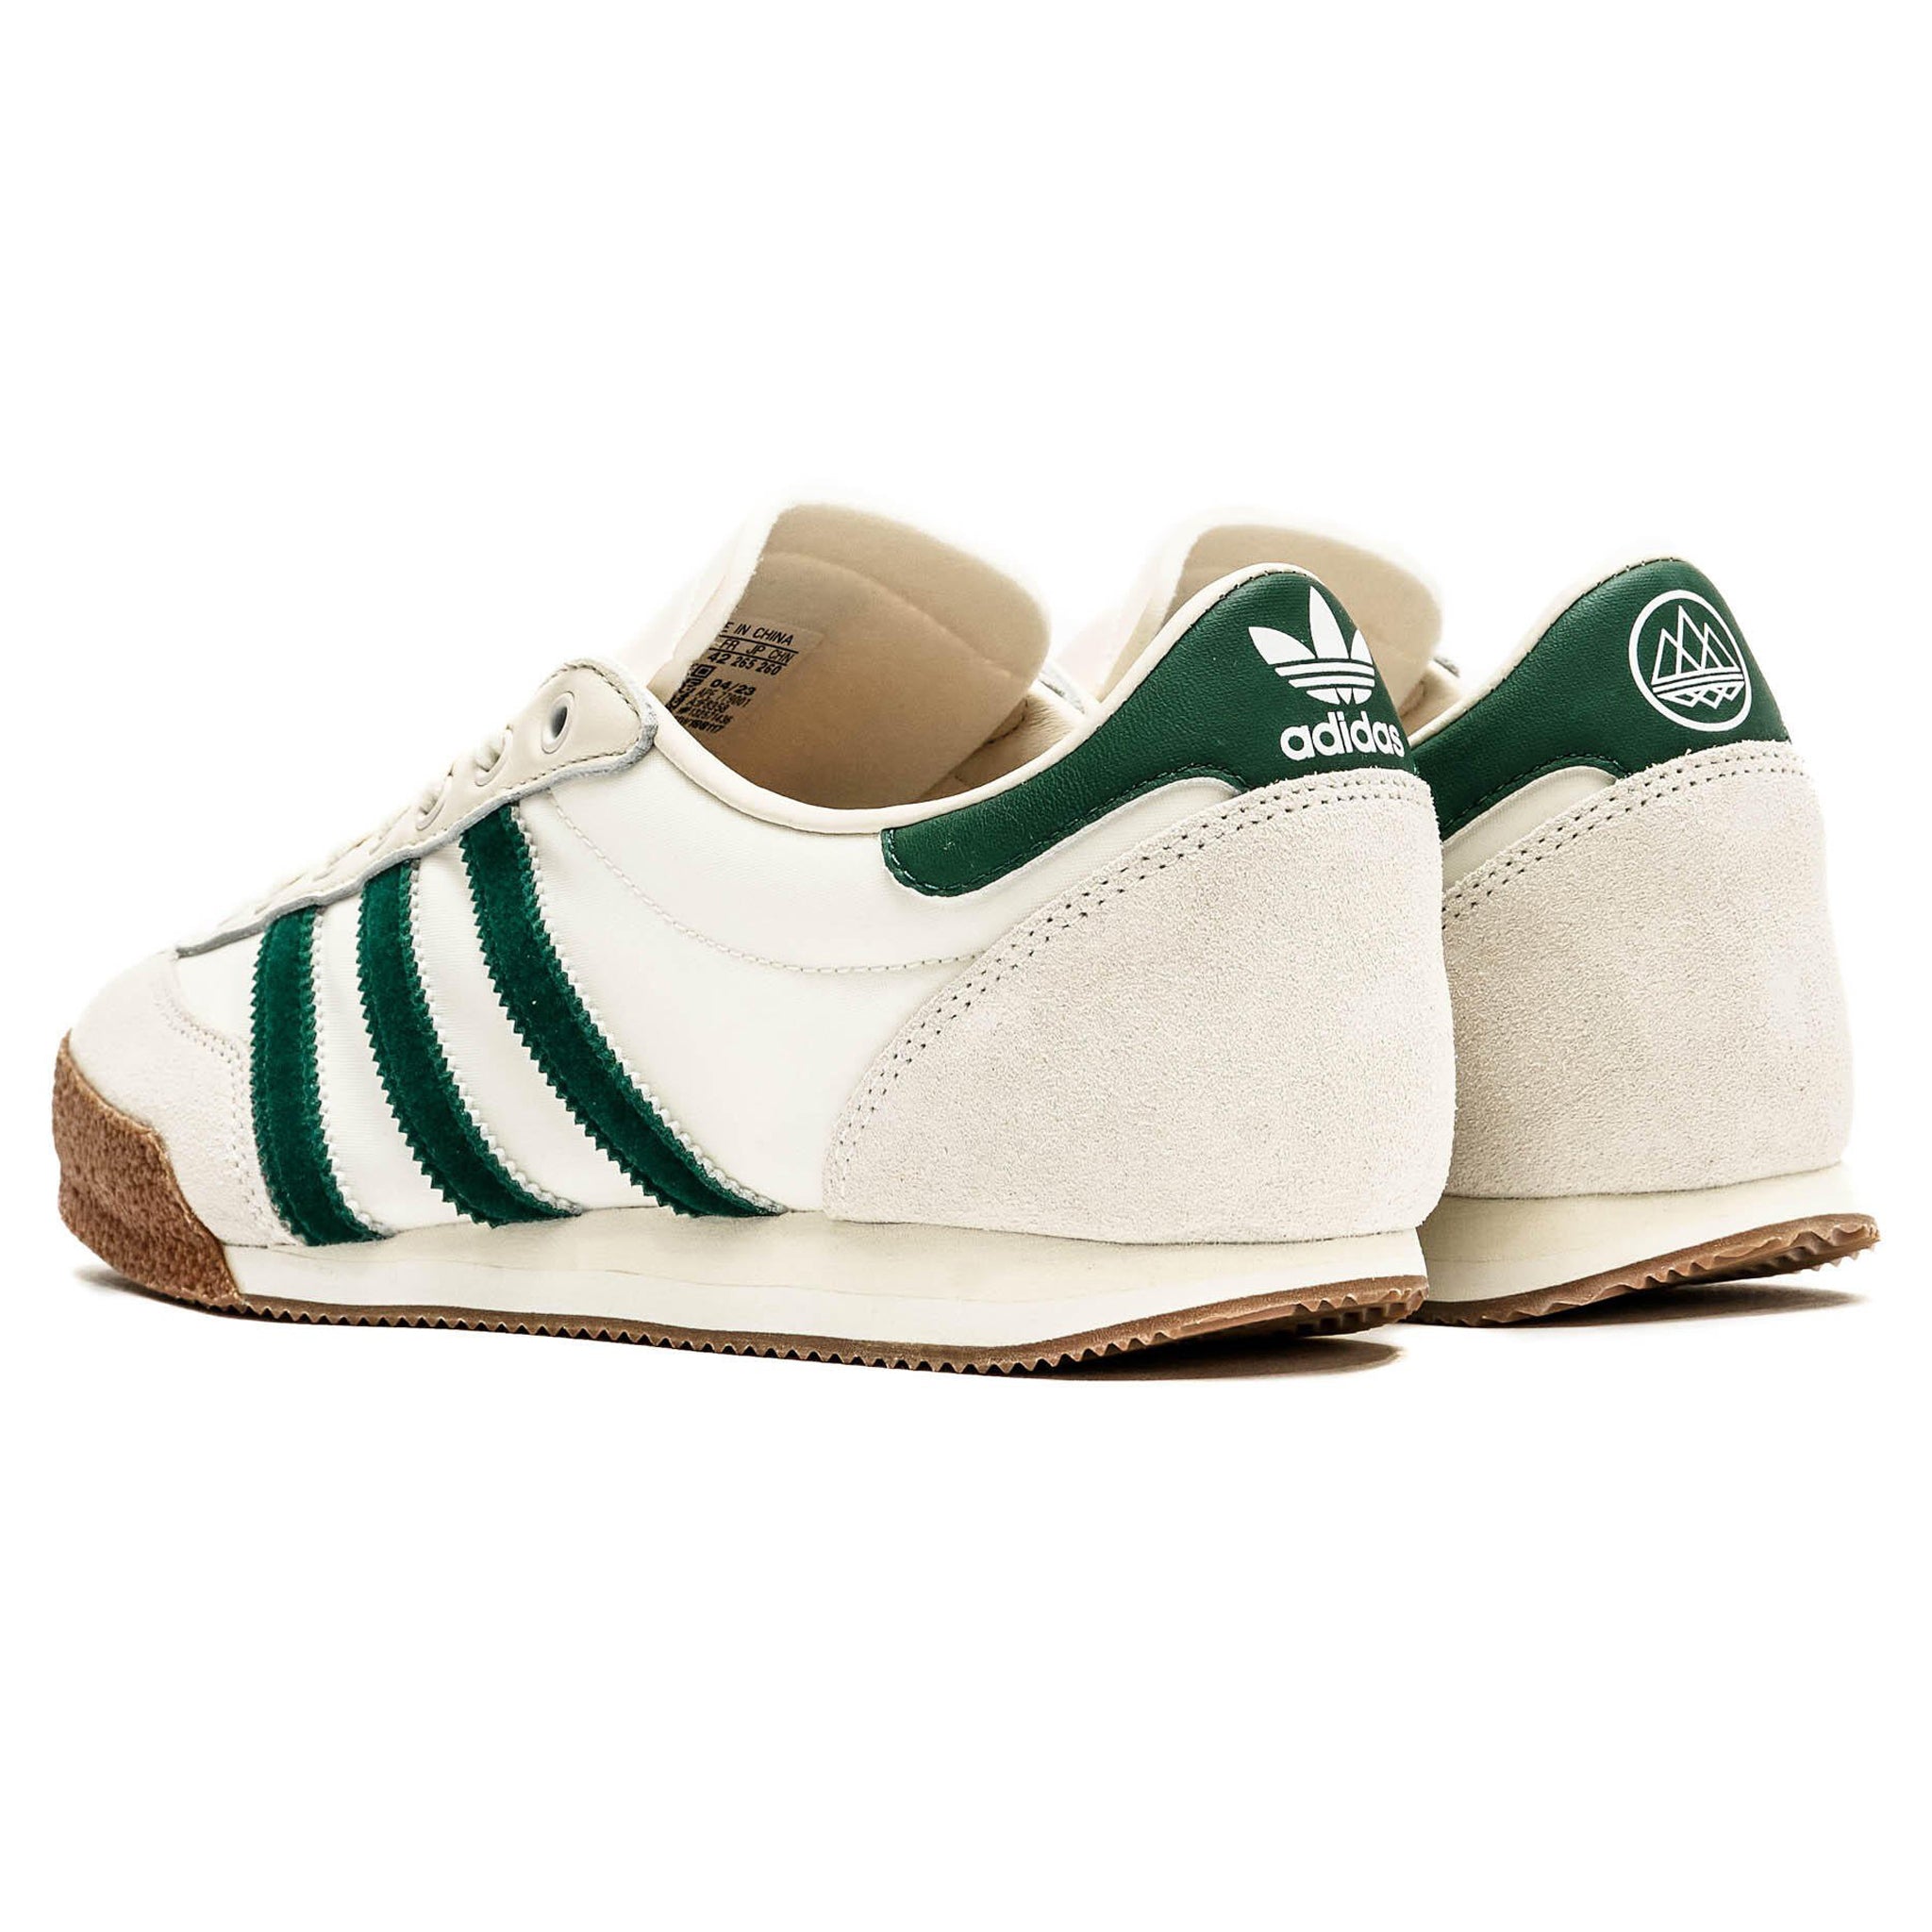 Heel View of Liam Gallagher x Adidas Spezial LG2 Bottle Green IF8358